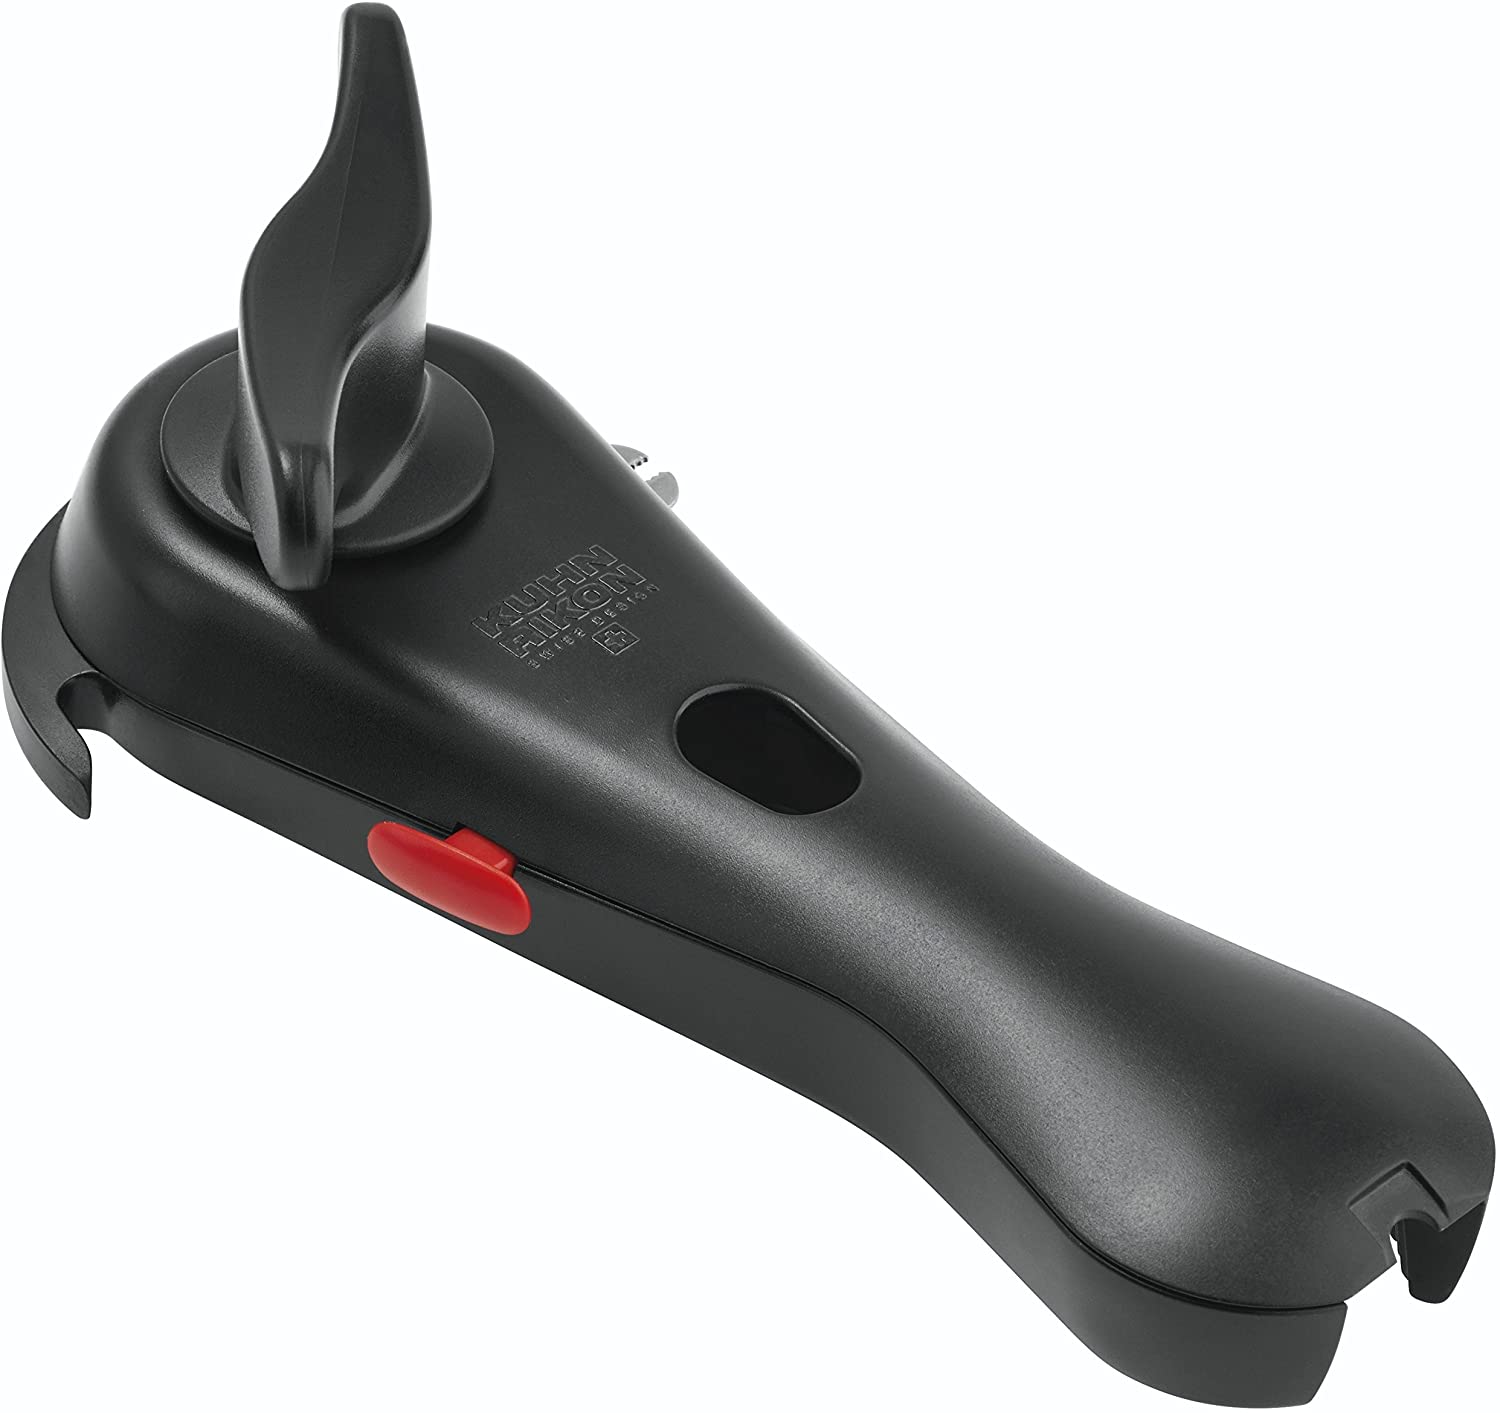 KUHN RIKON 5-in-1 Car Safety Can Opener Black Safety Can Opener No Sharp Edges Automatically Holds The Edge Of The Can Opens Cans, Bottles, Bottle Caps And More